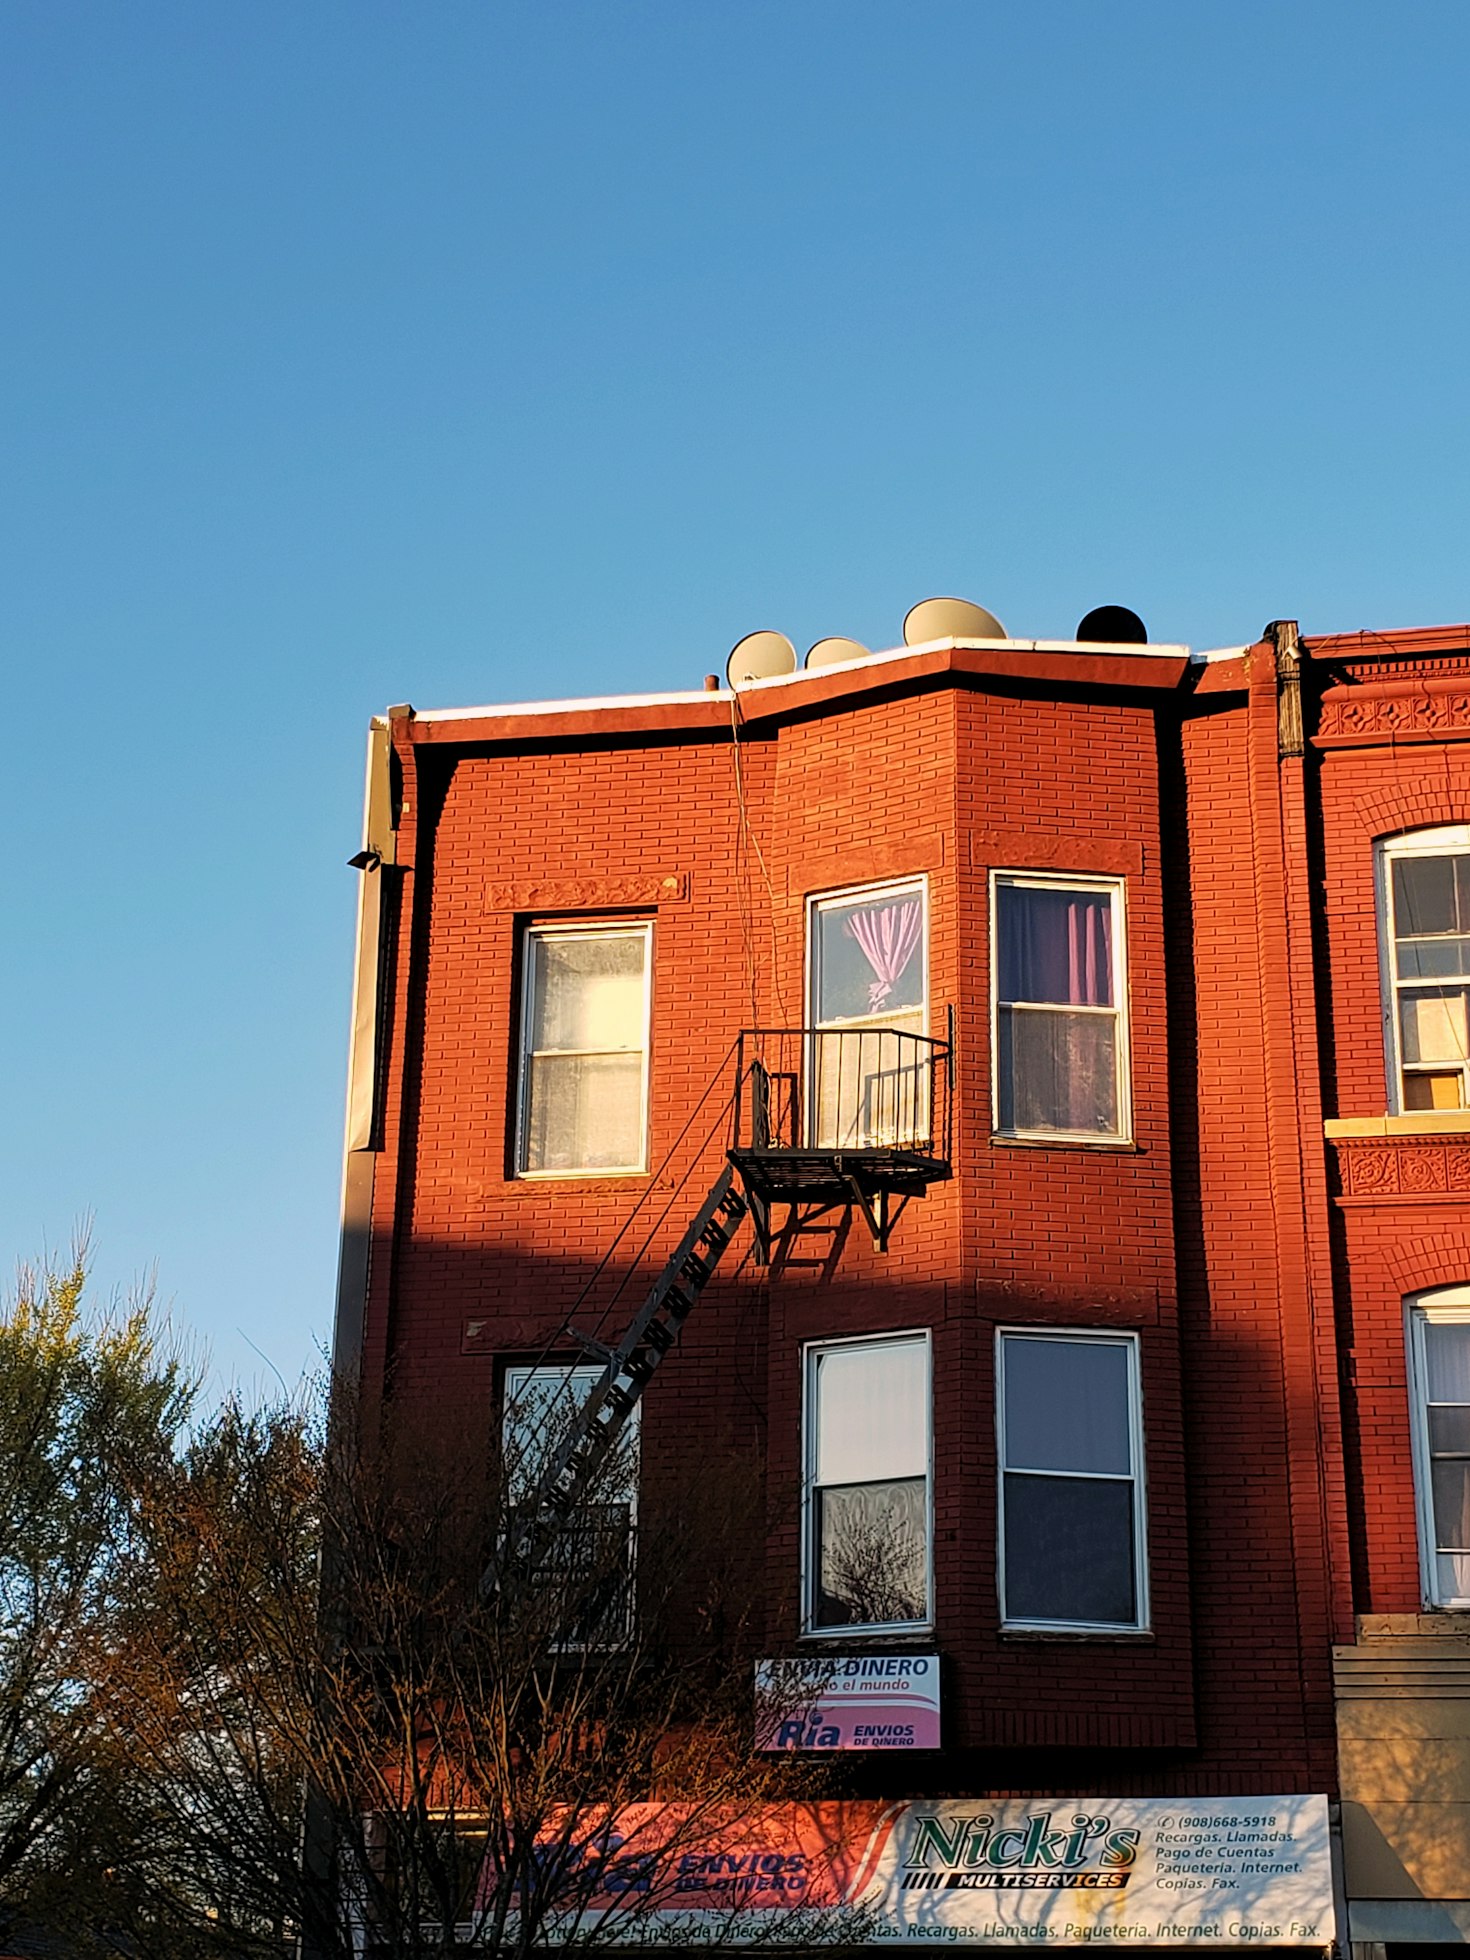 A Multifamily Two-Story Building with an External Staircase in New Jersey